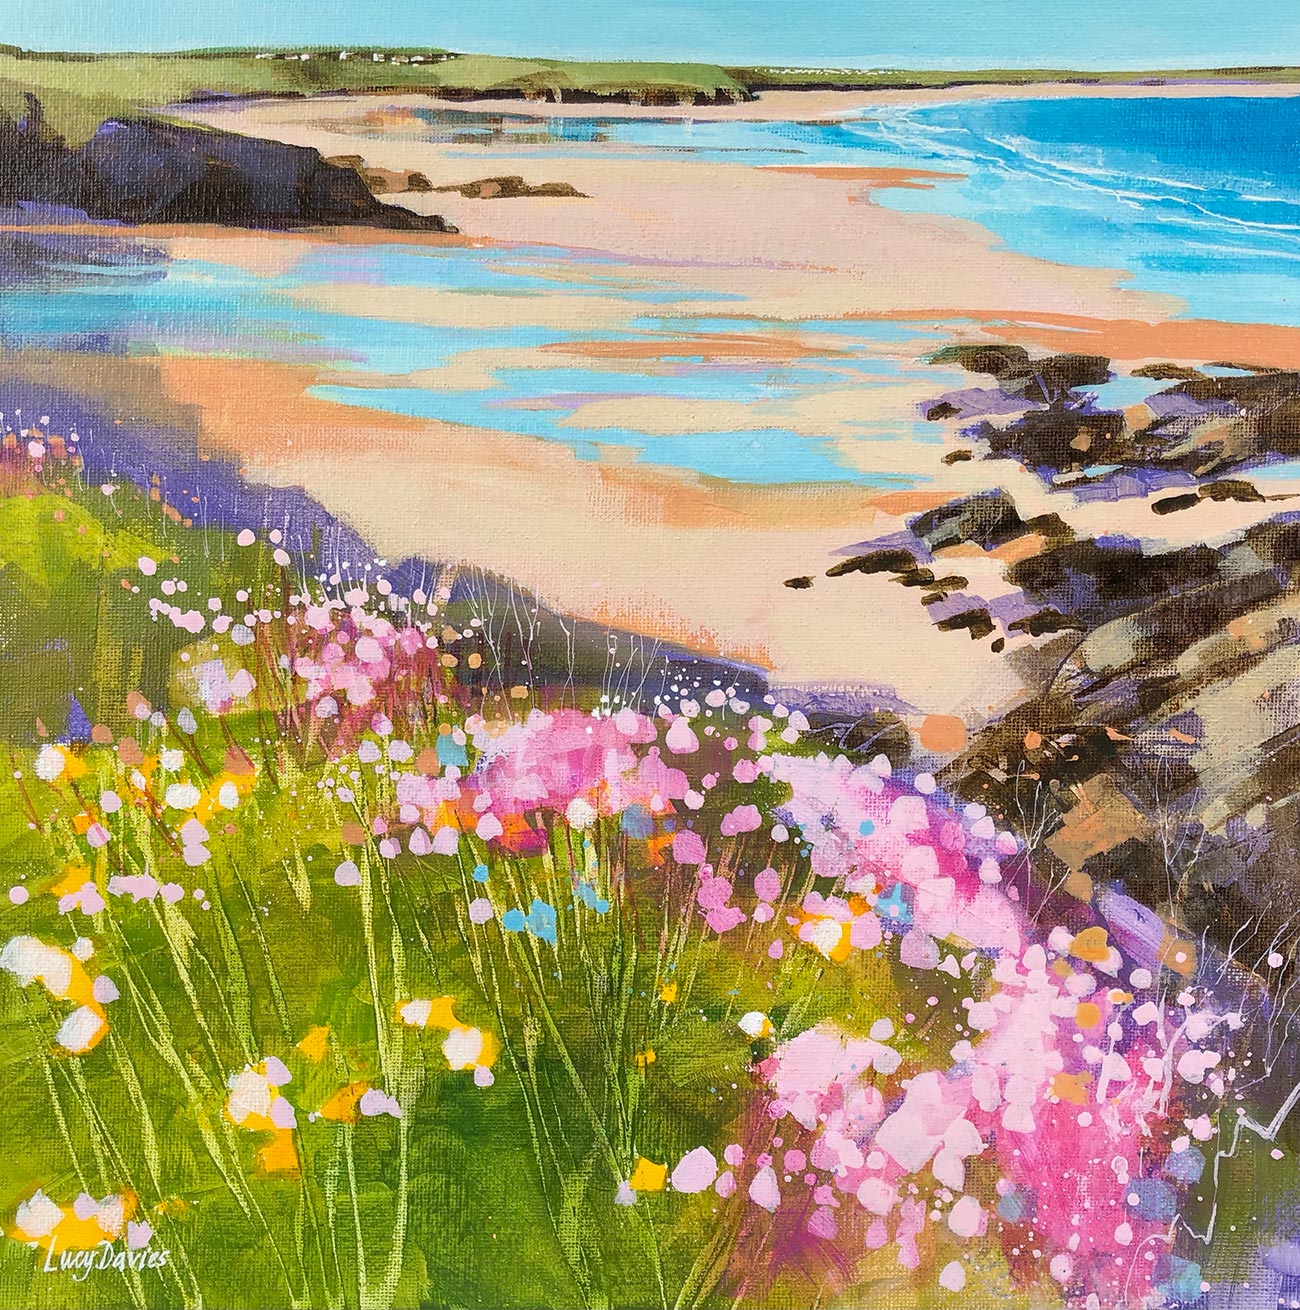 Sea Thrift at Godrevy - Lucy Davies